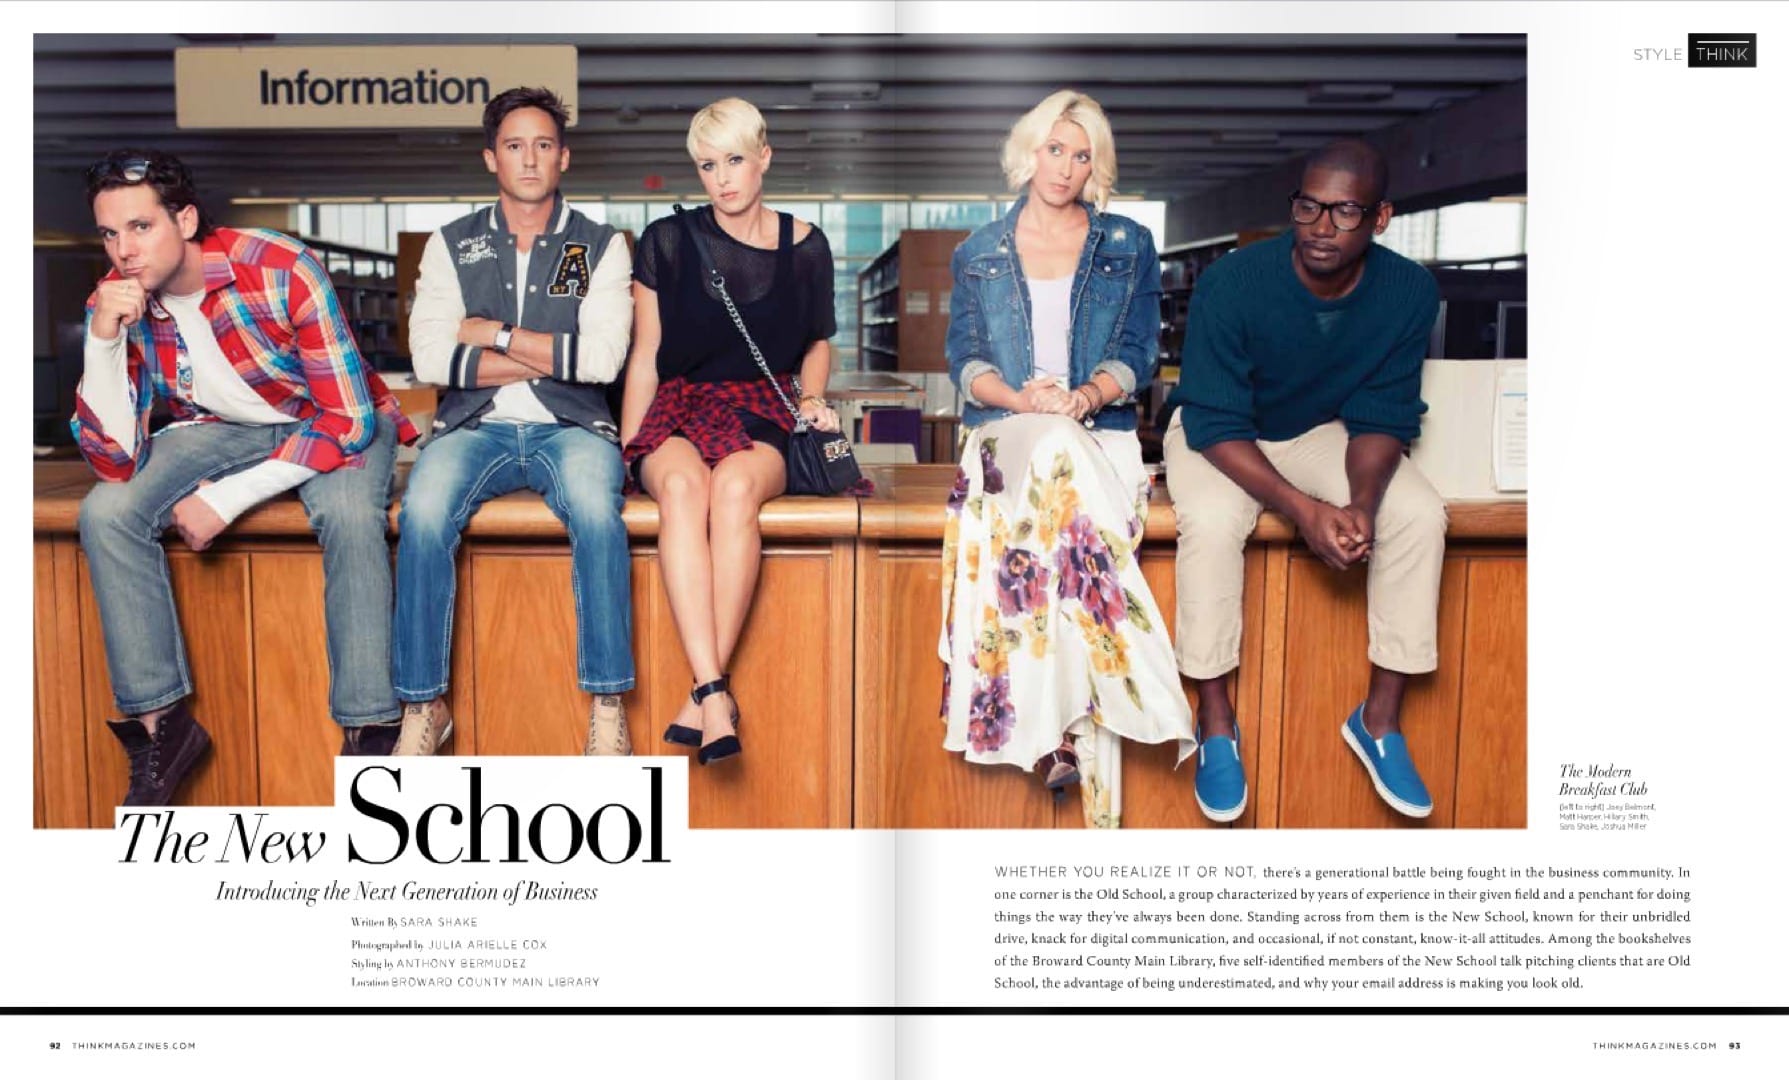 Pages from Think Magazine about The New School The Modern Breakfast Club